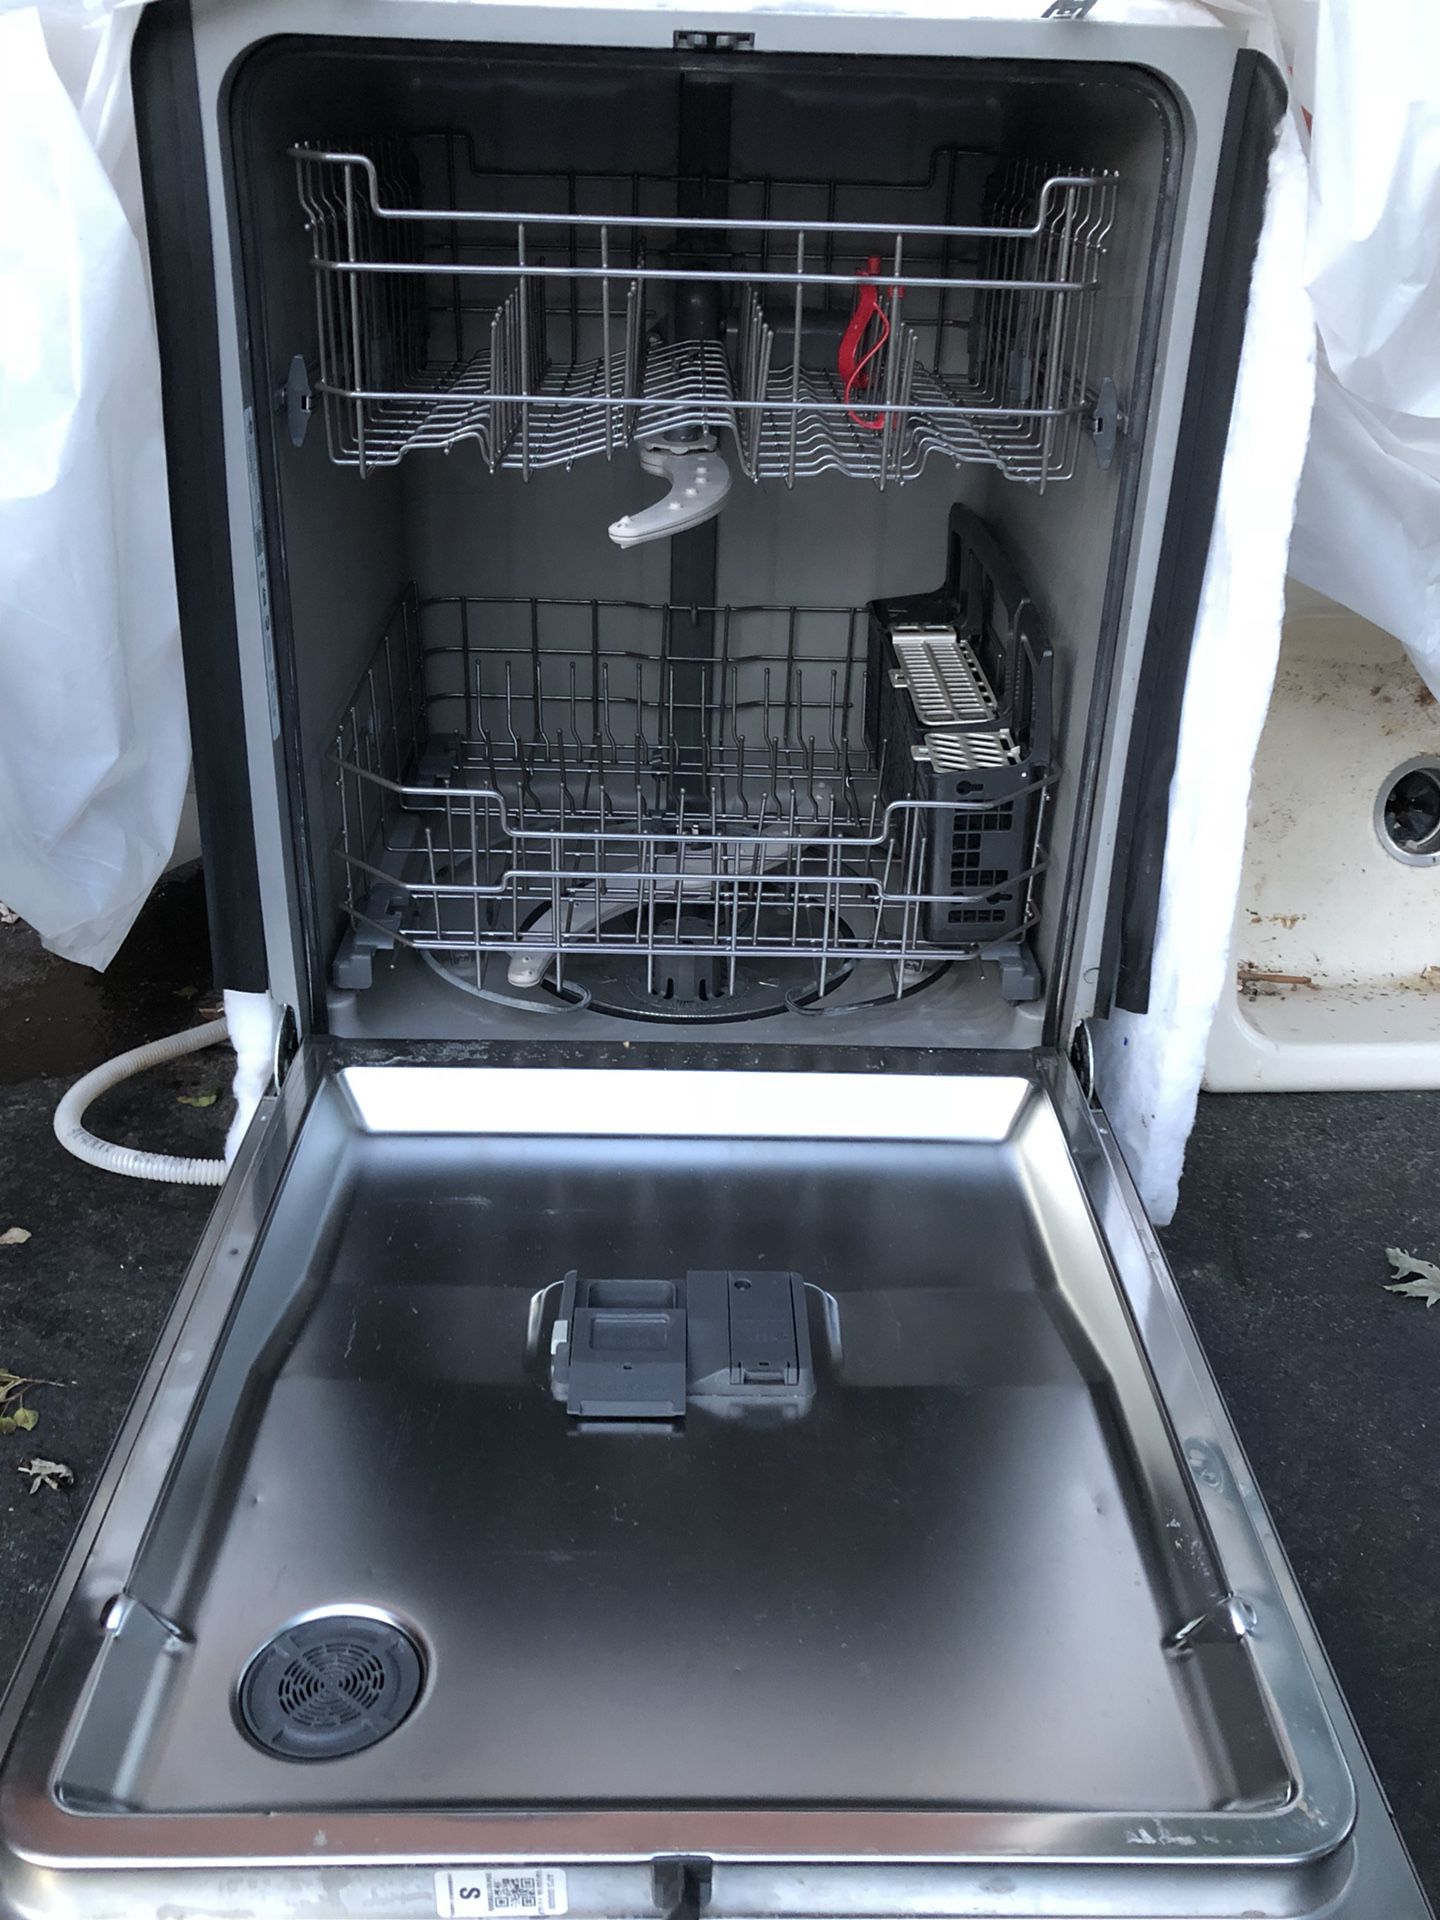 GE dishwasher. Less than a year old. Paid $700. Wife hated the color.